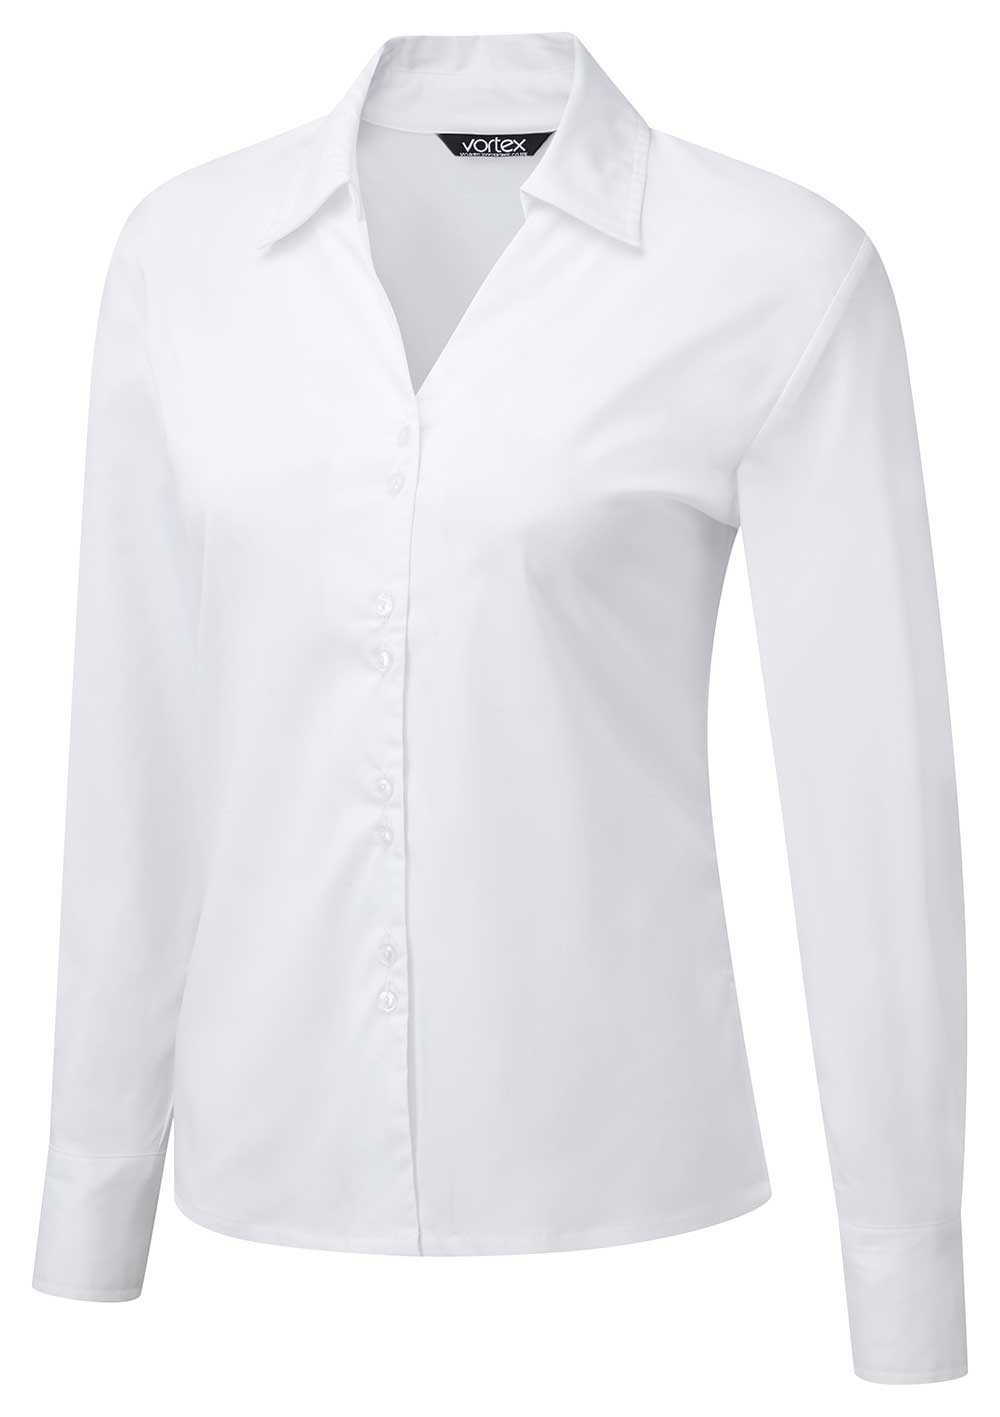 Women's Blouses & Tops | Corporate Clothing, Uniforms & Workwear ...